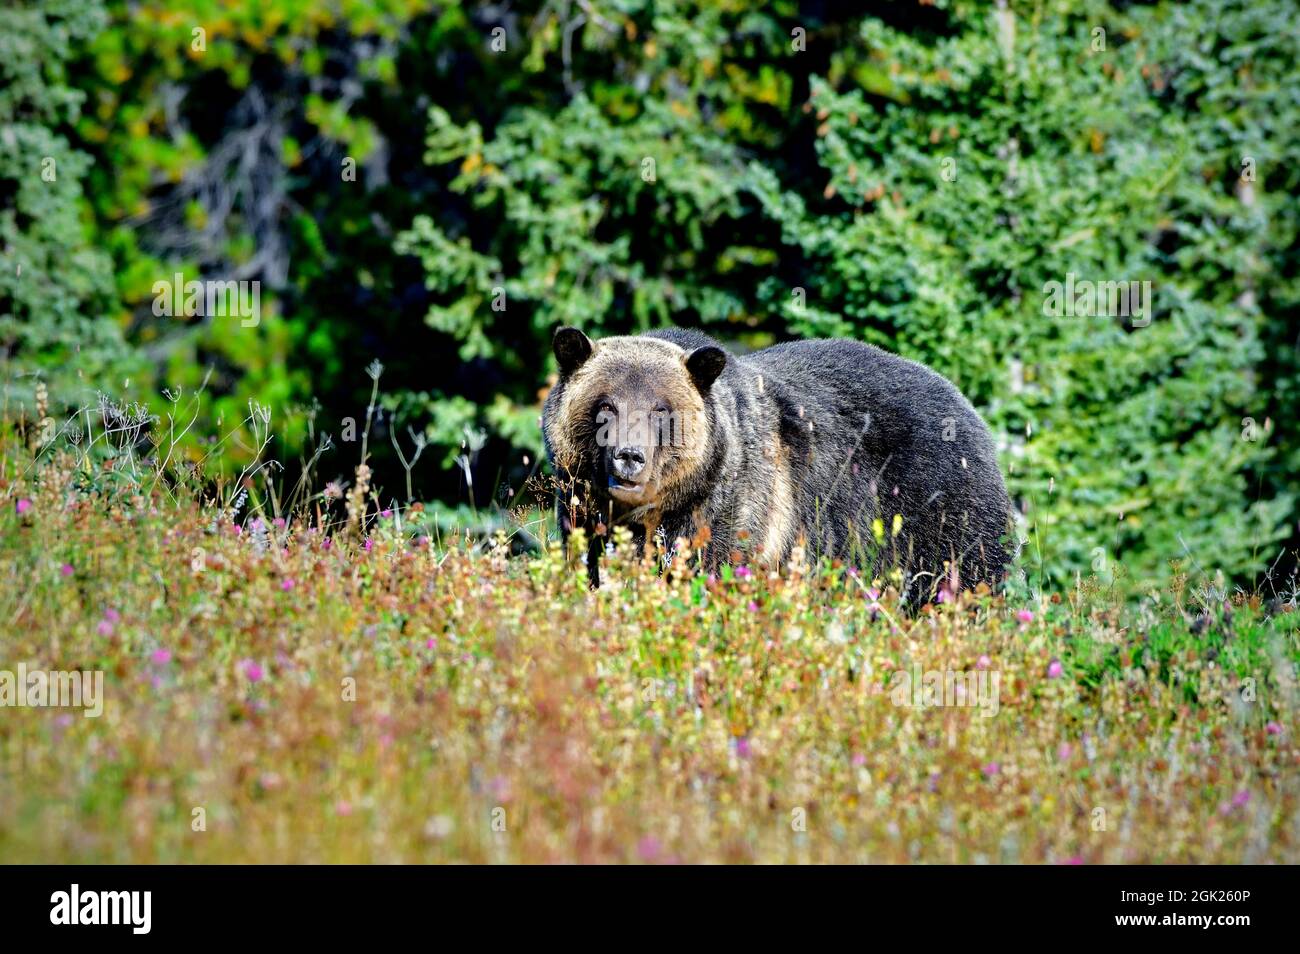 An adult grizzly bear 'Ursus arctos', feeding on plant roots in rural Alberta Canada Stock Photo